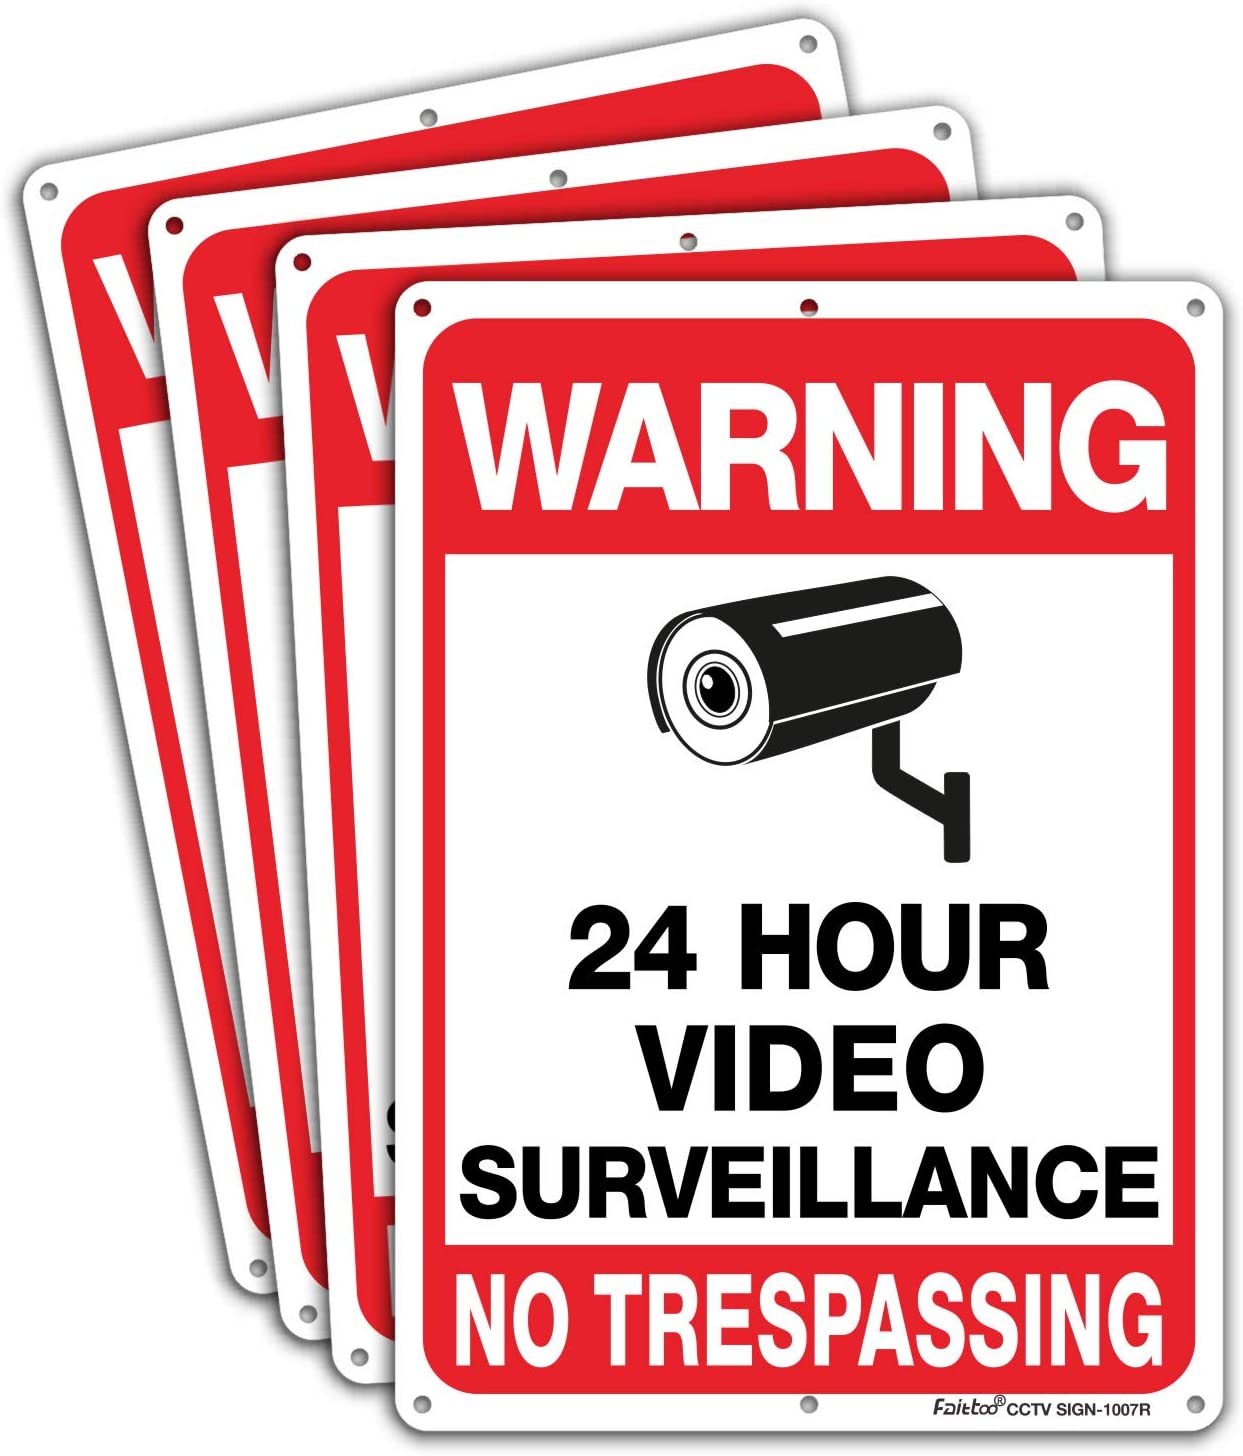 Video Surveillance Sign, No Trespassing Sign, Metal Reflective Warning Sign, 10 x7 Inches 0.40 Aluminum, (2 Pack) Fade Resistant, UV Protected, Waterproof, Indoor or Outdoor Use for Home Business CCTV